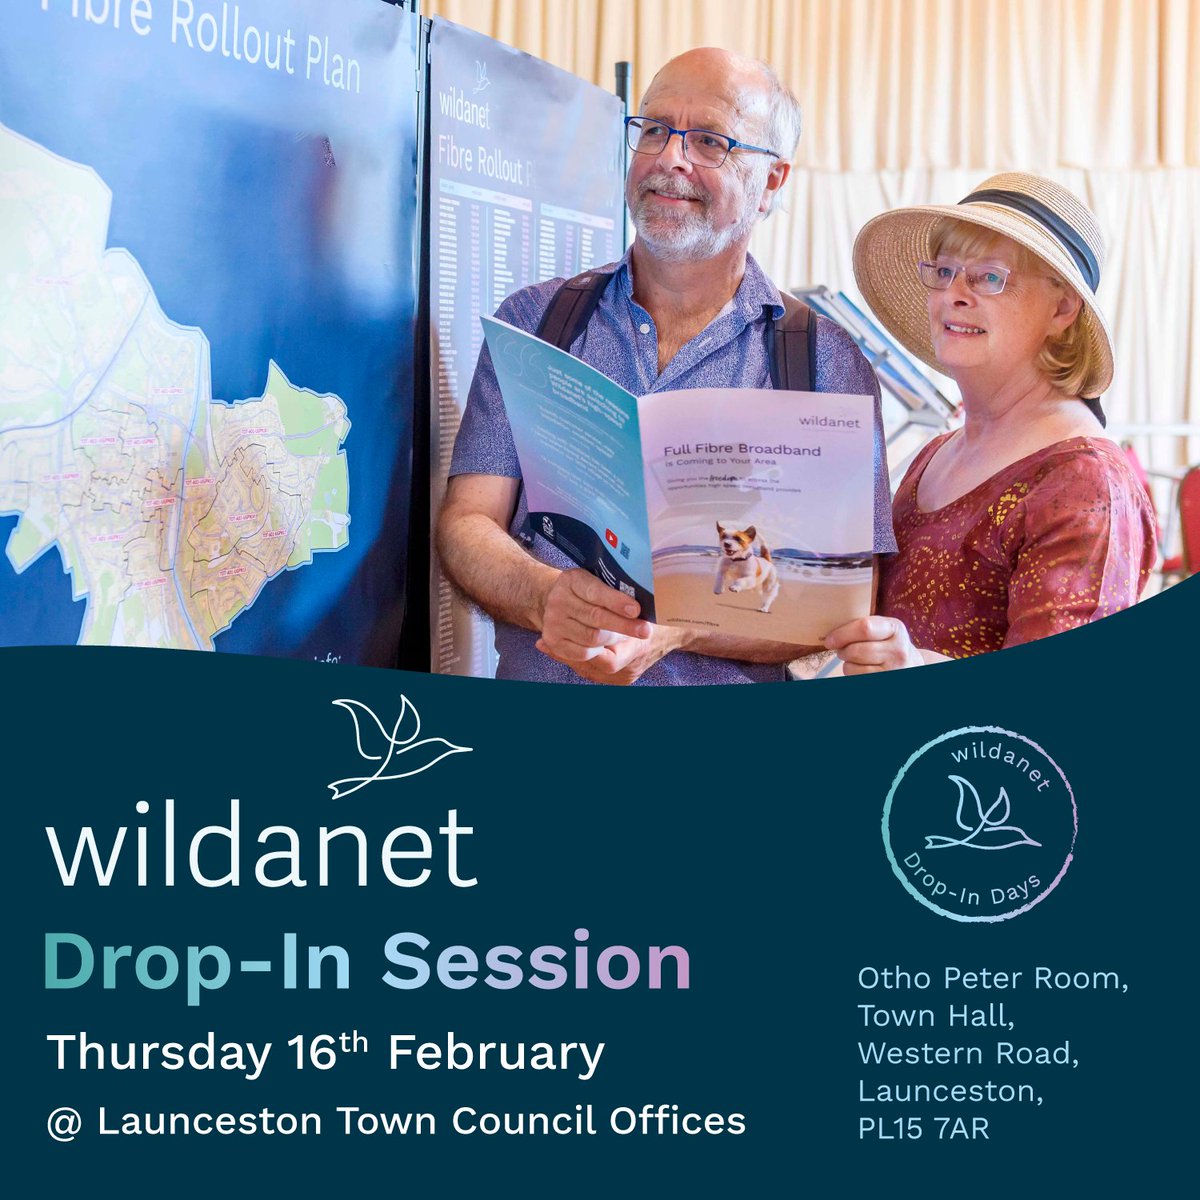 Pop in to chat with the Wildanet team tomorrow, Thursday 16th February and learn about our high-speed, full fibre broadband service and our latest offers. You can find us in the Otho Peter Room in Launceston Town Council Offices.